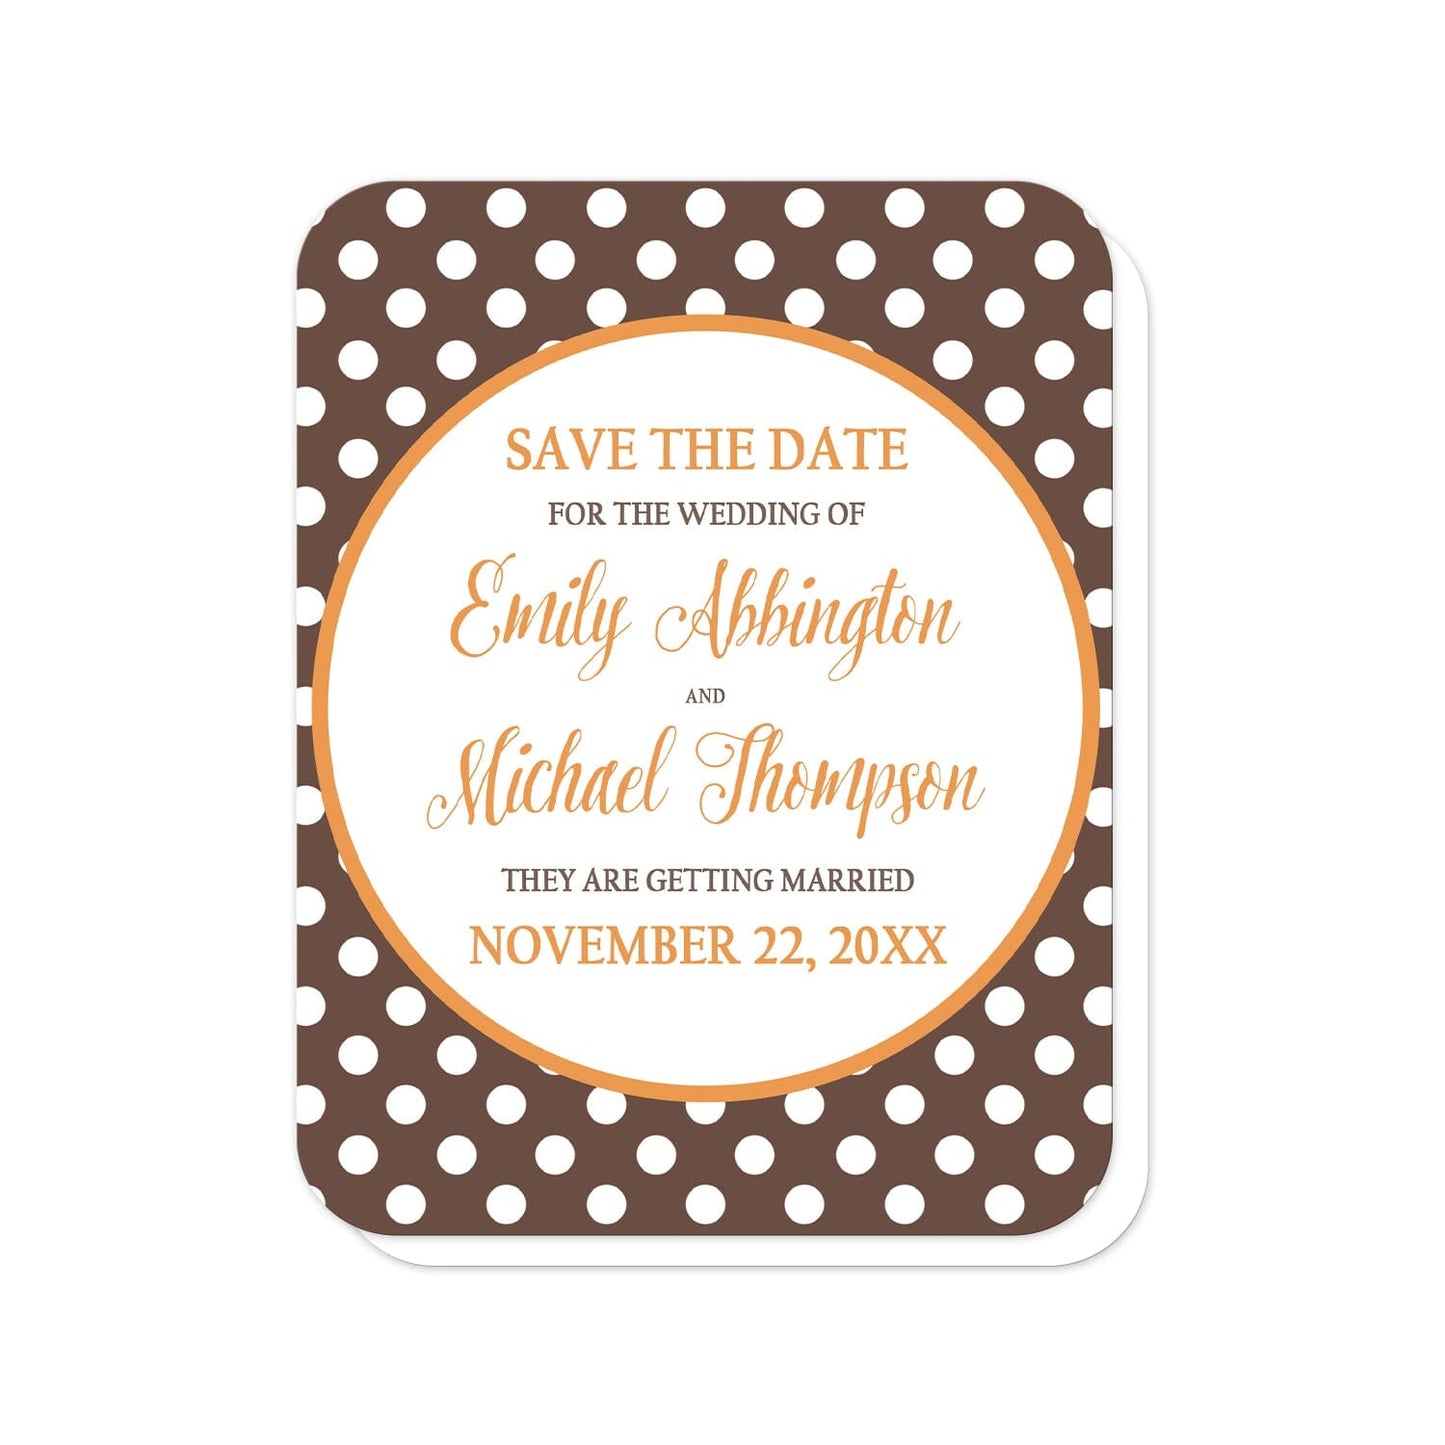 Orange Brown Polka Dot Save the Date Cards (with rounded corners) at Artistically Invited. Autumn-inspired orange brown polka dot save the date cards with your personalized wedding date announcement details custom printed in orange and brown inside a white circle outlined in orange, over a brown polka dot pattern. "Save the date", the couple's names, and the wedding date are printed in orange while the remaining details are printed in brown.